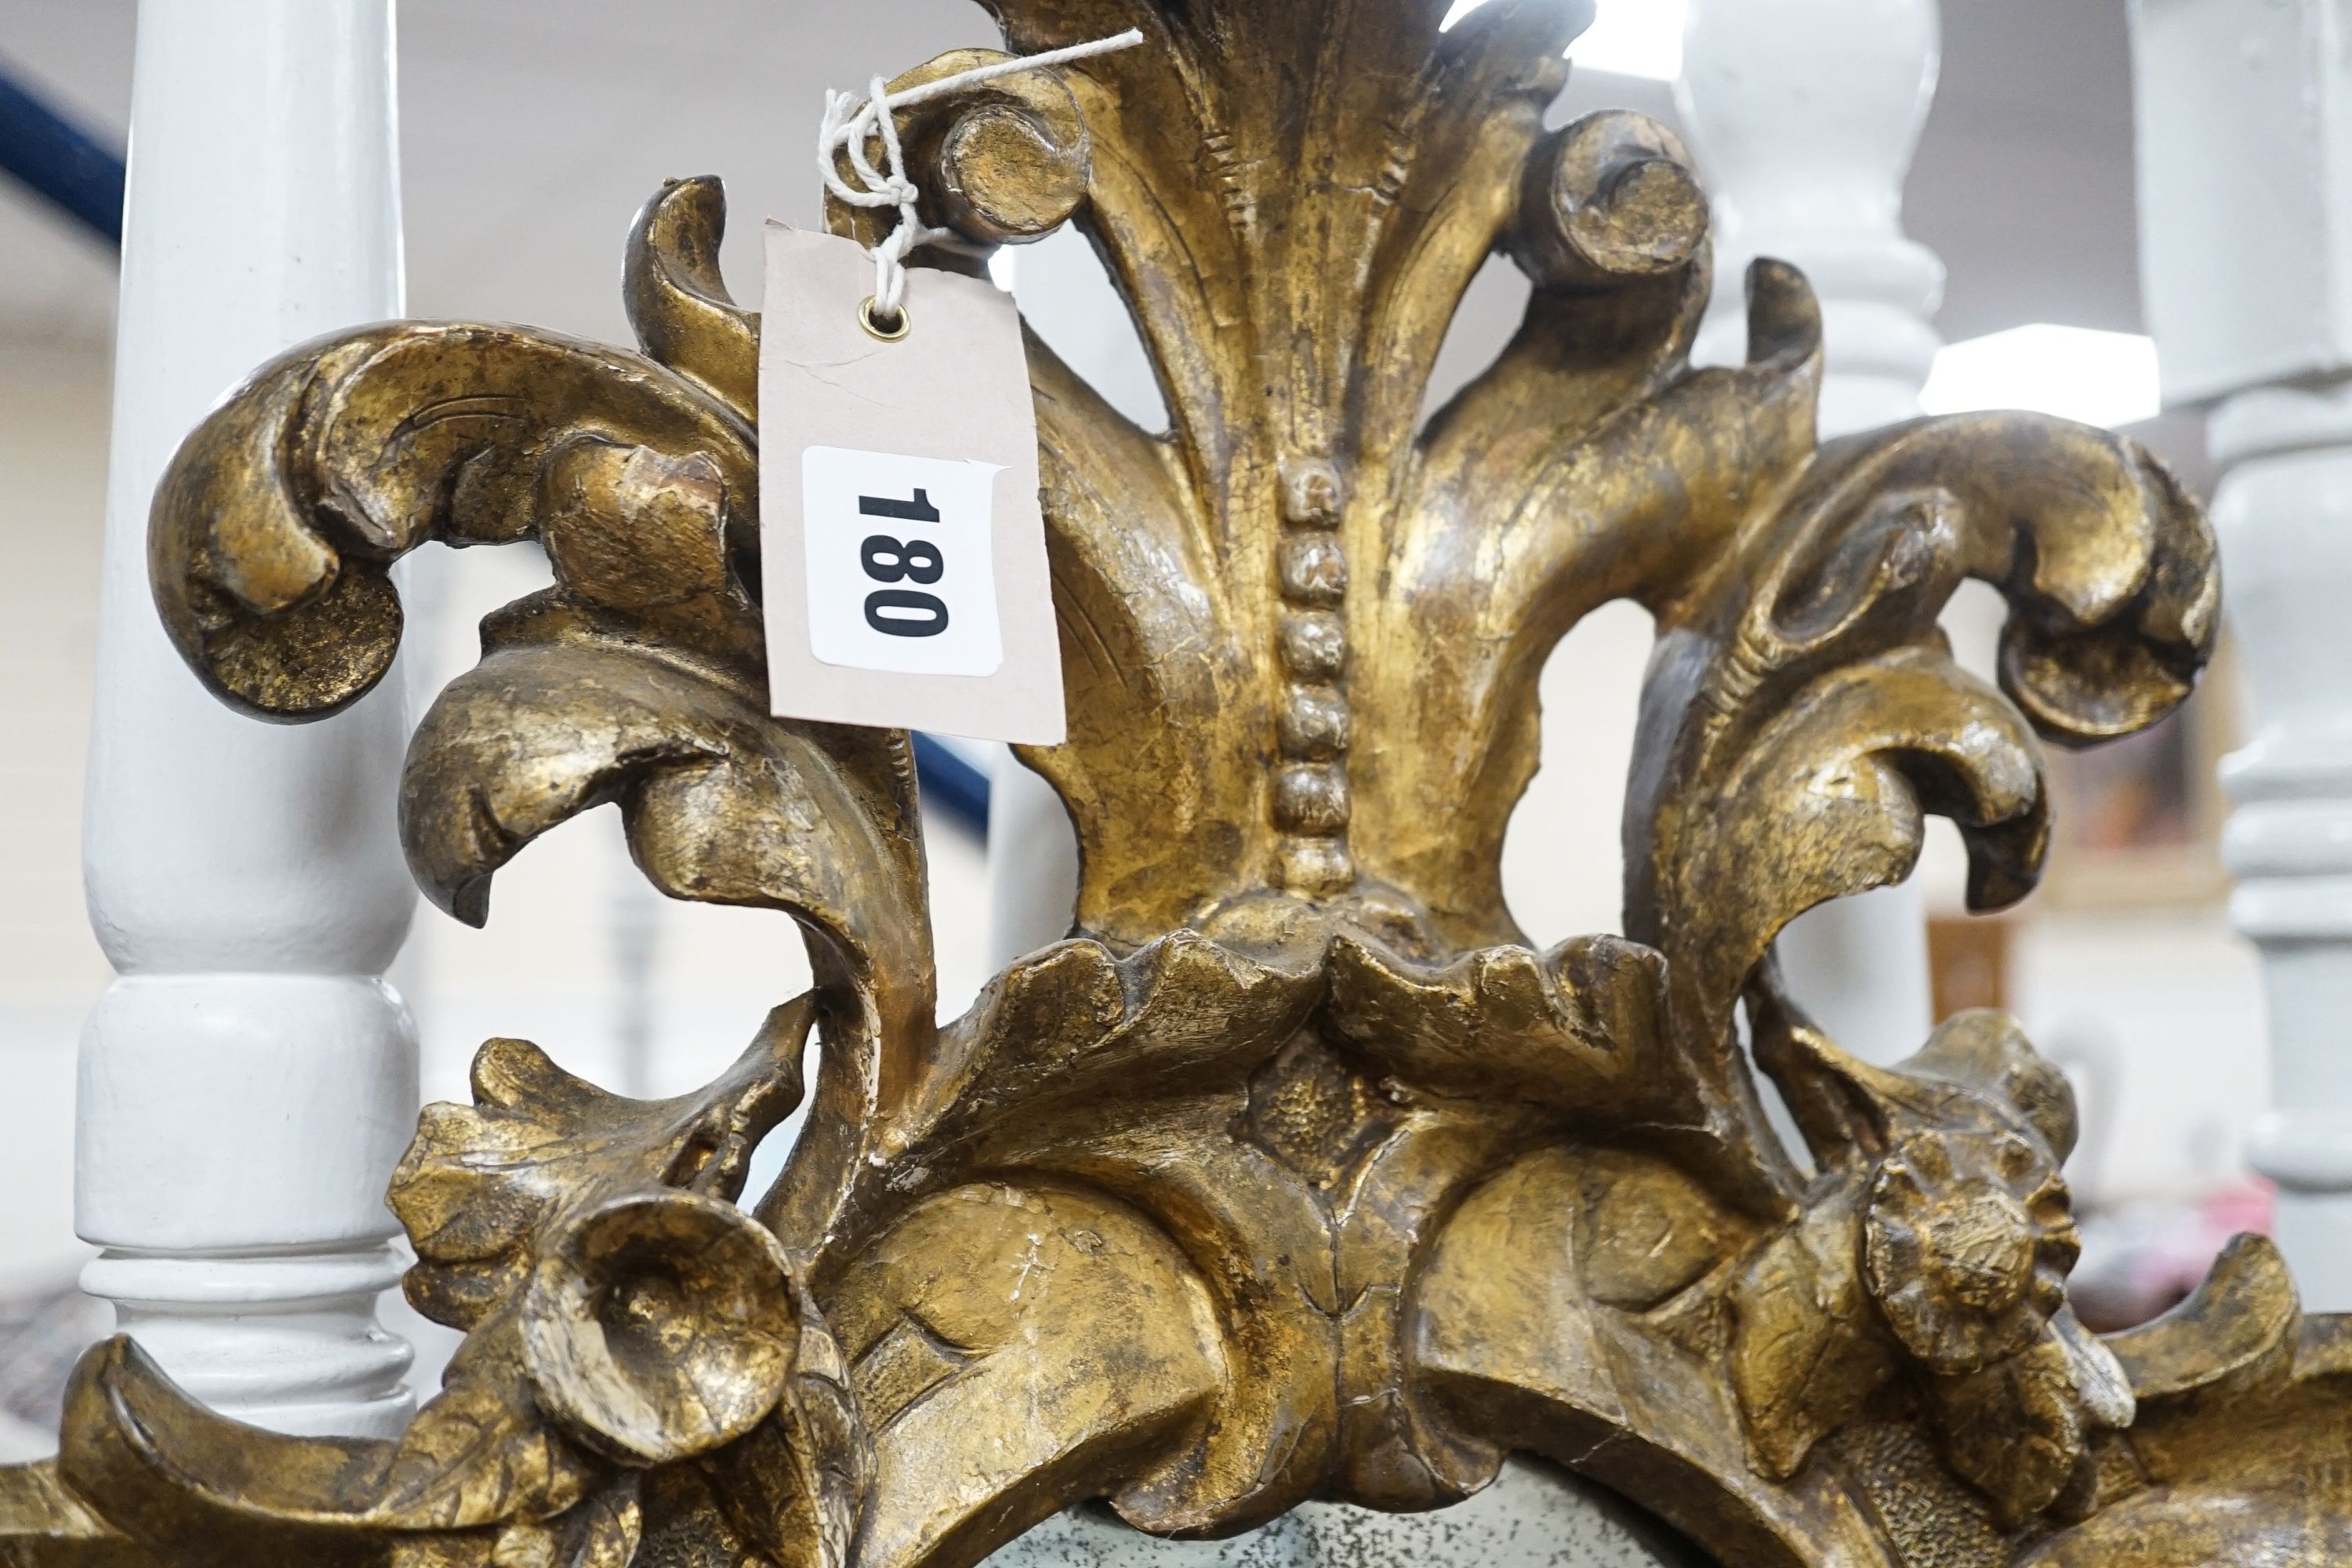 An 18th century Italian carved giltwood cartouche wall mirror, width 53cm, height 76cm